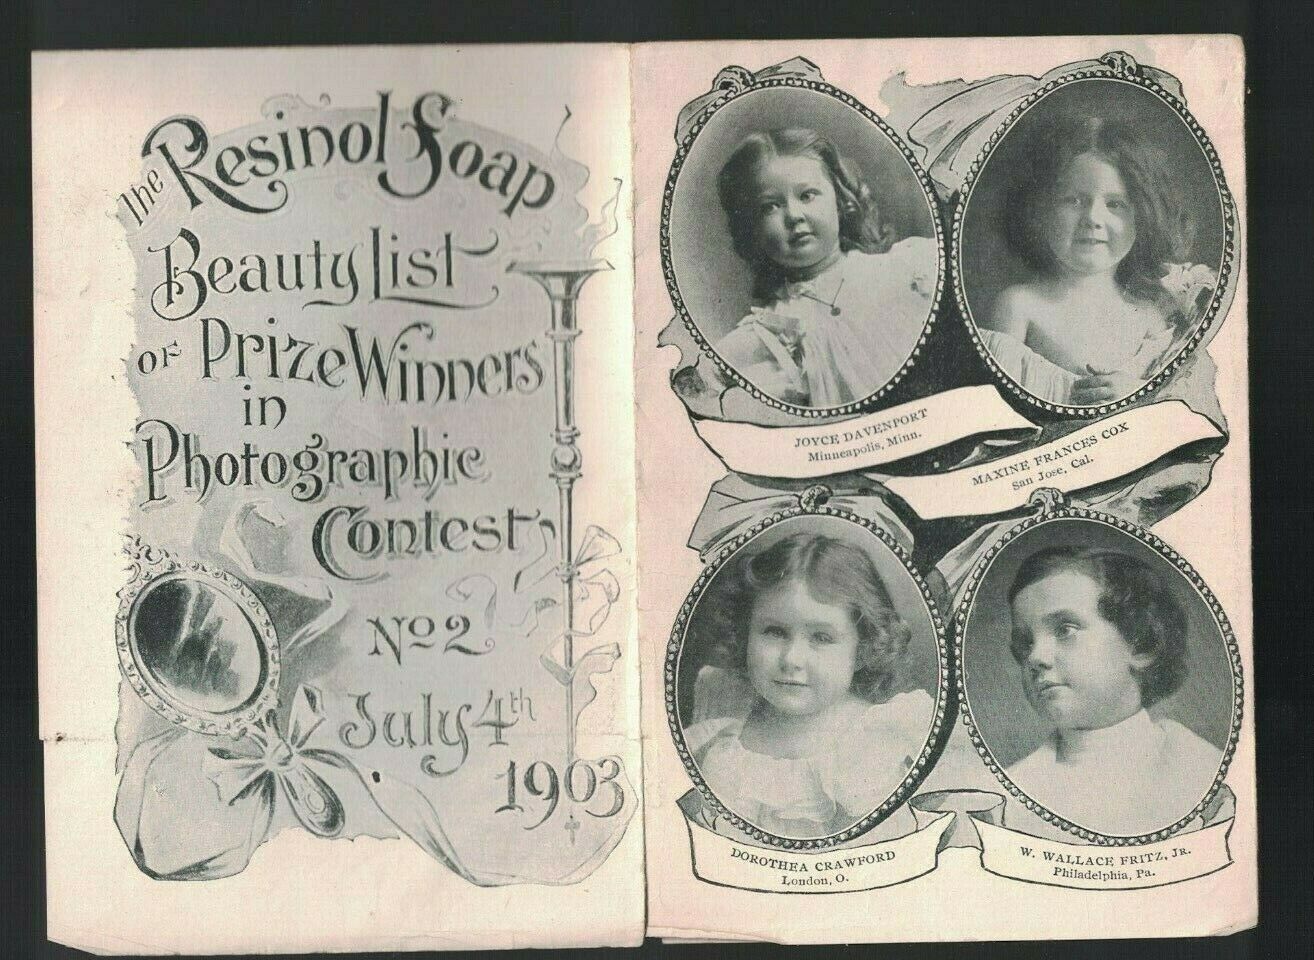 Resinol Soap 1903 Beauty List of Prize Winners in Photographic Contest Brochure